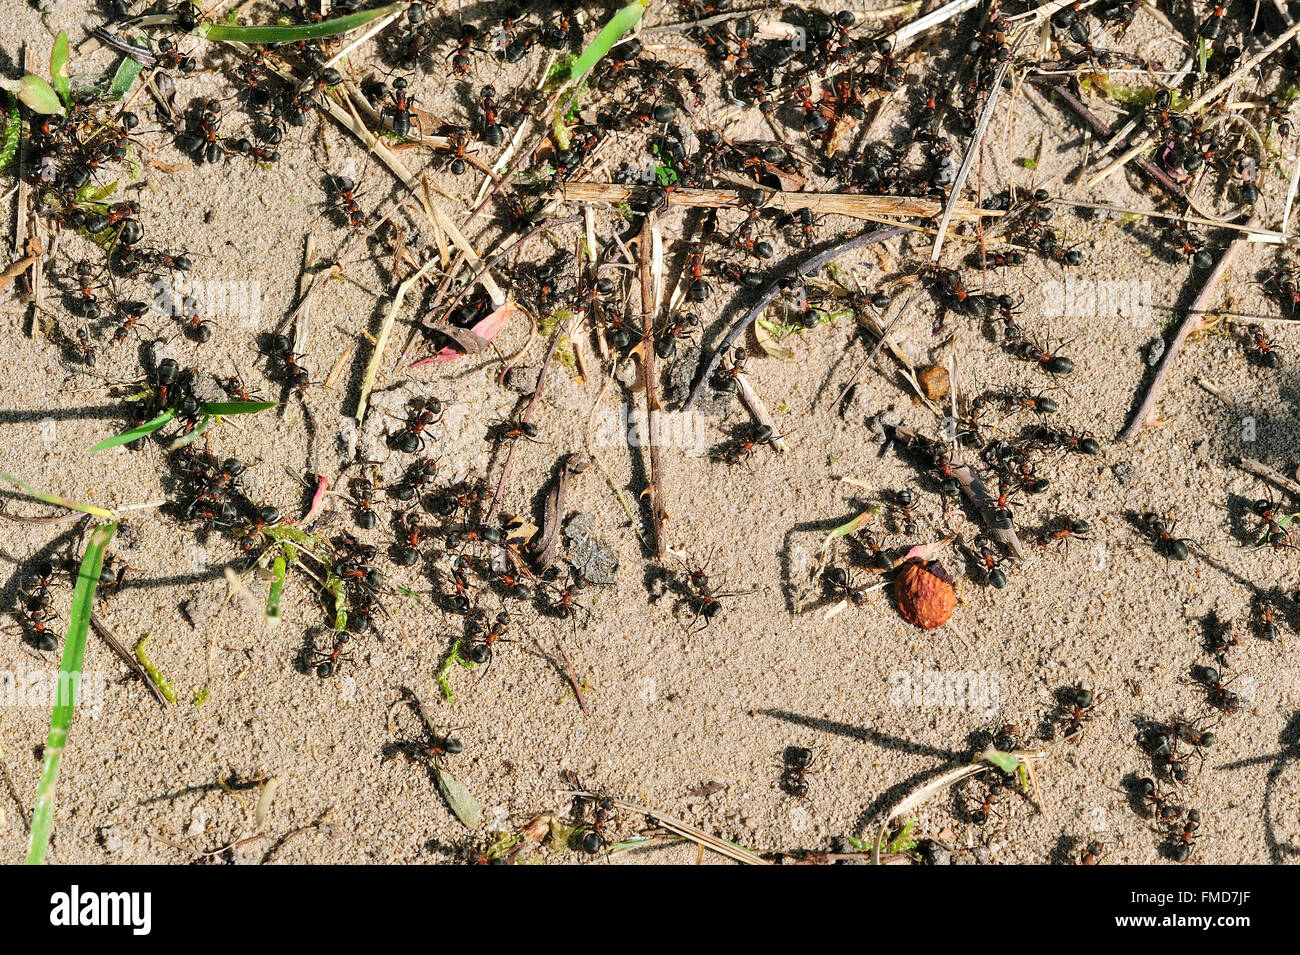 Black-backed meadow ants (Formica pratensis / Formica pratensis var. nigricans) foraging on the ground Stock Photo